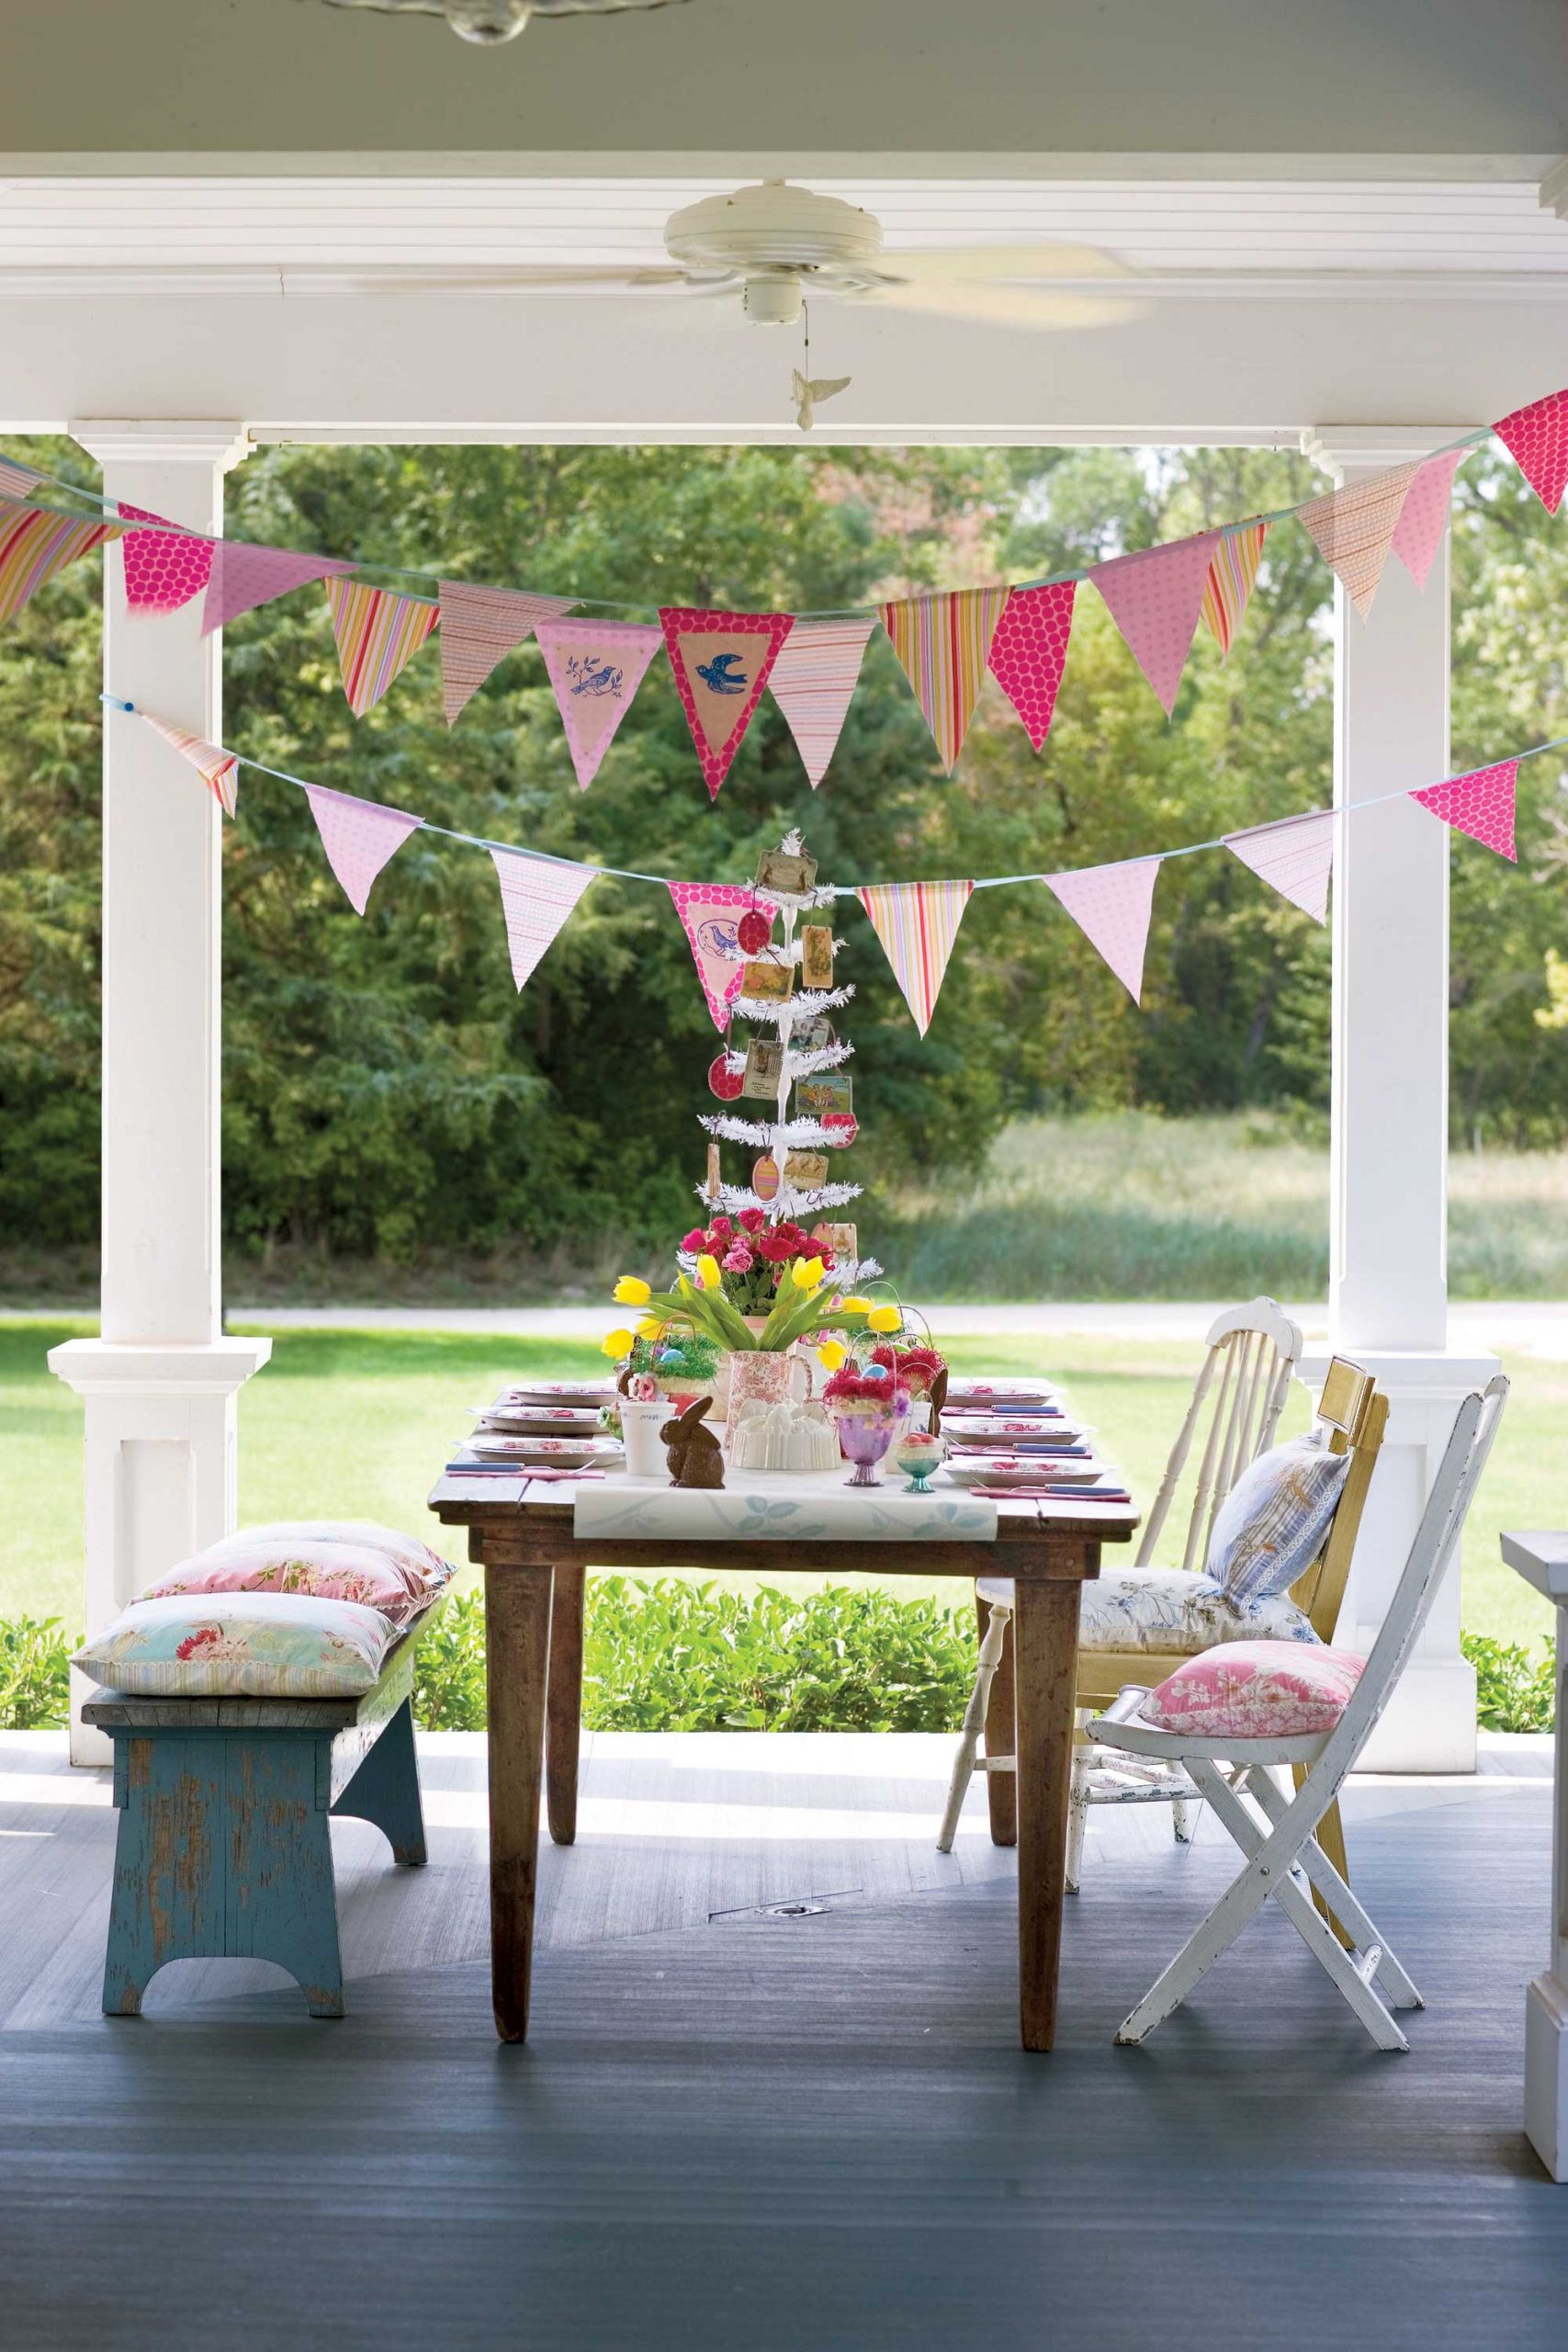 Easter Party Decor Ideas
 30 Easter Party Ideas Decorations Food and Games for